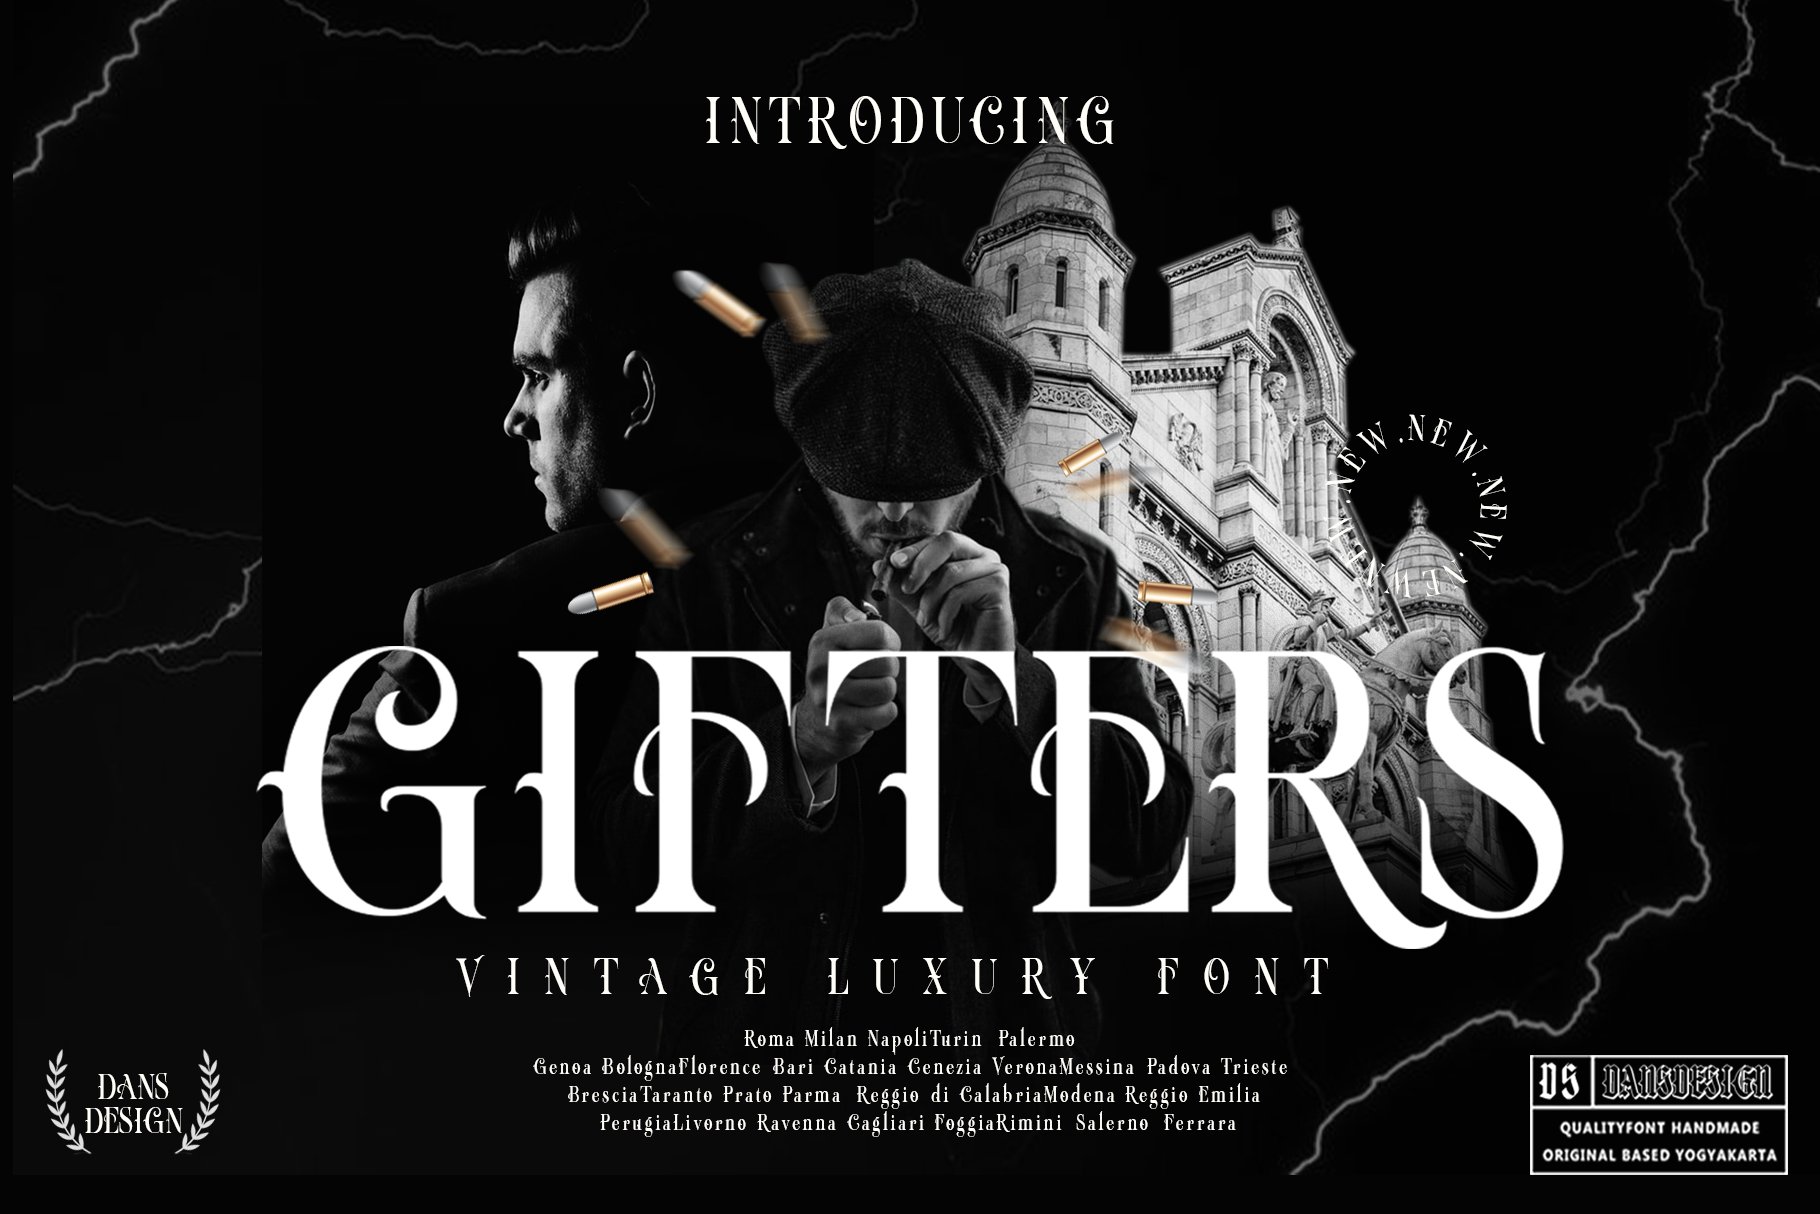 GIFTERS cover image.